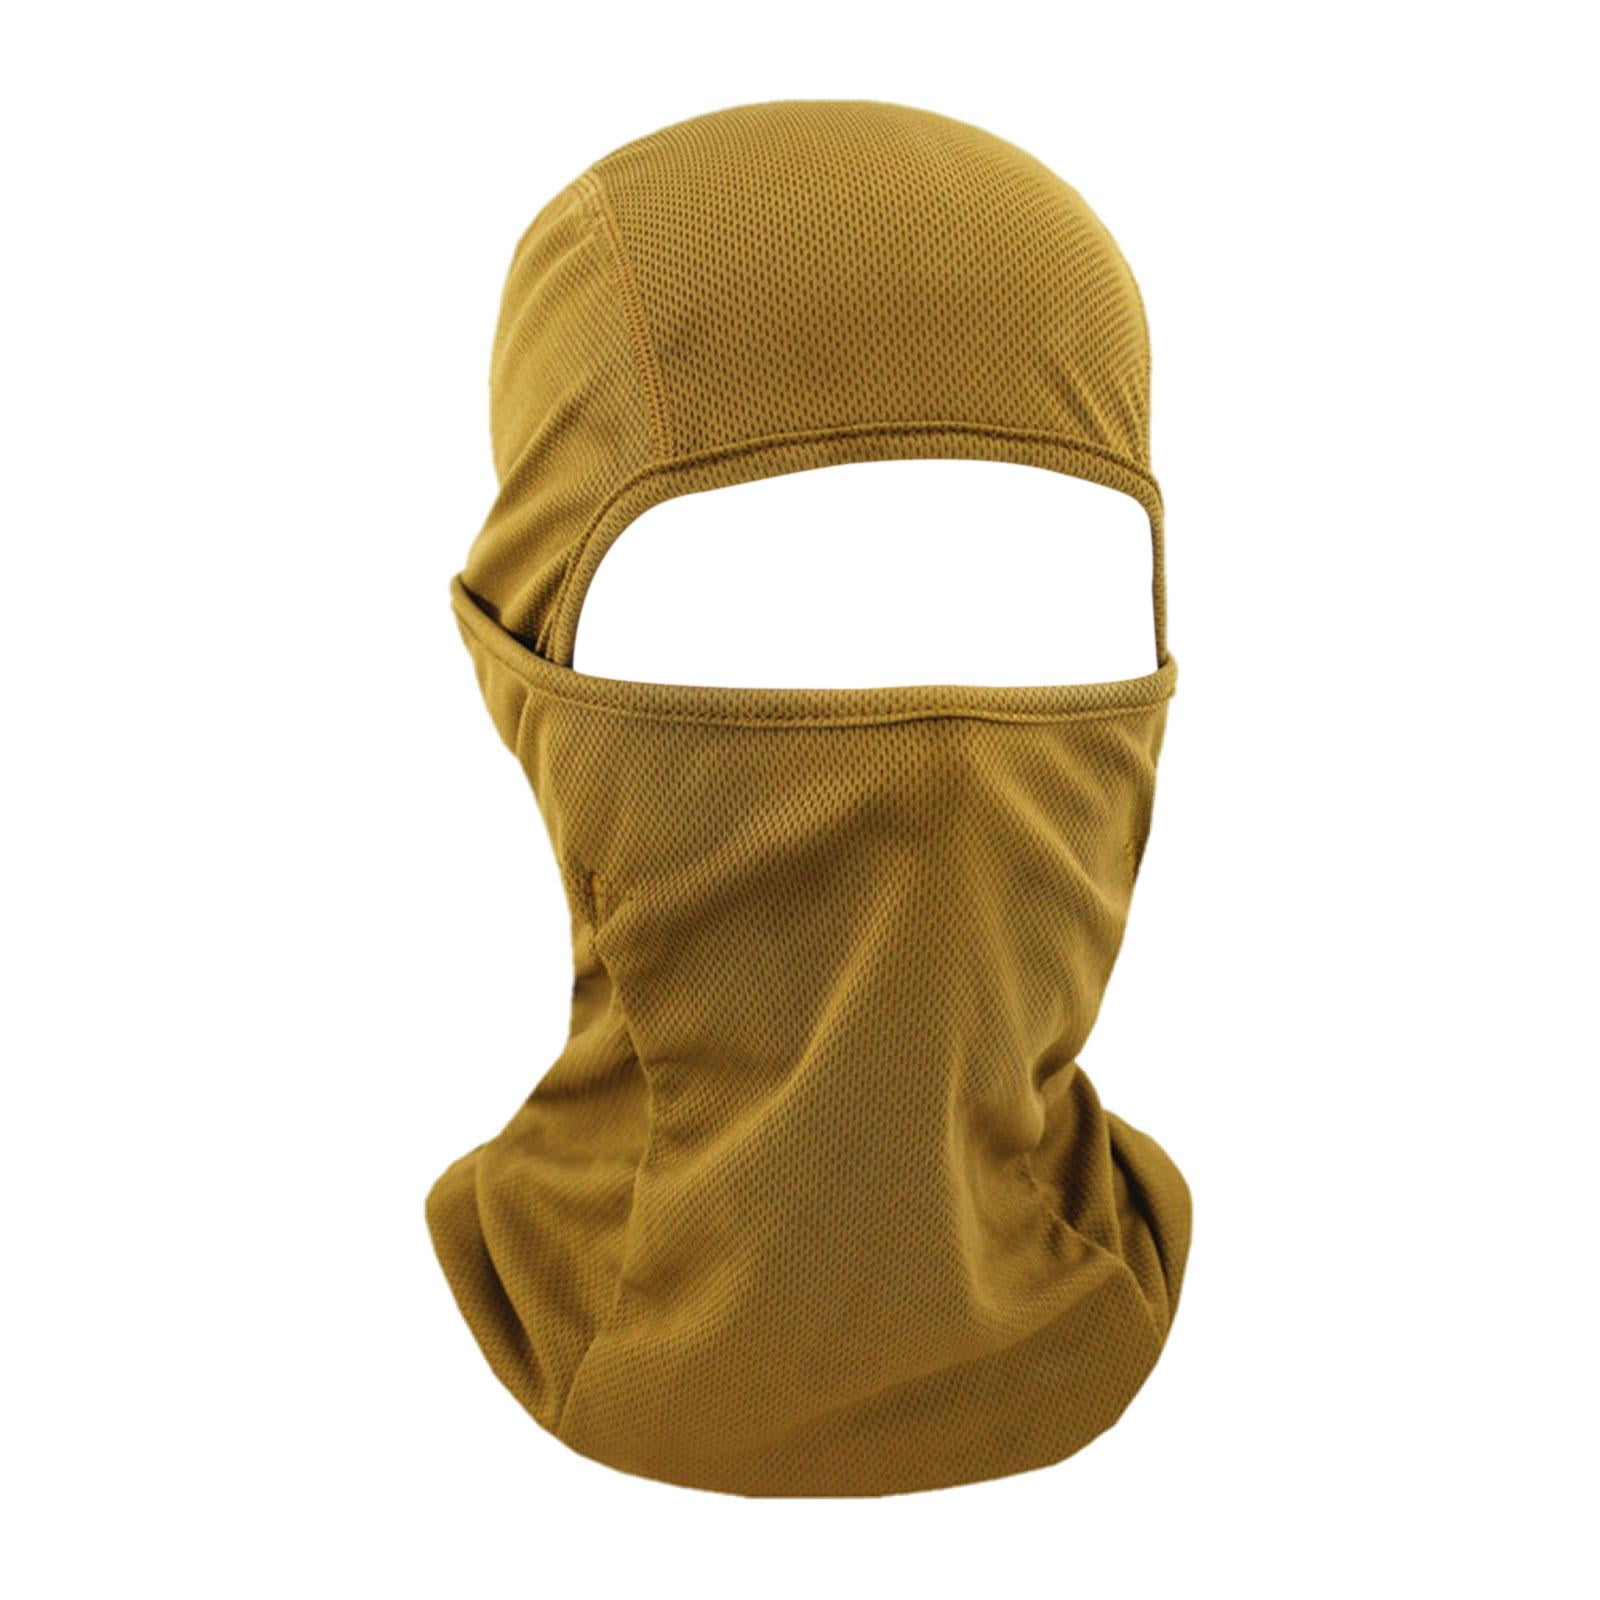 Details about   3PCS UV Protection Full Face Mask Hunting Balaclava Windproof Cycling Skull Cap 